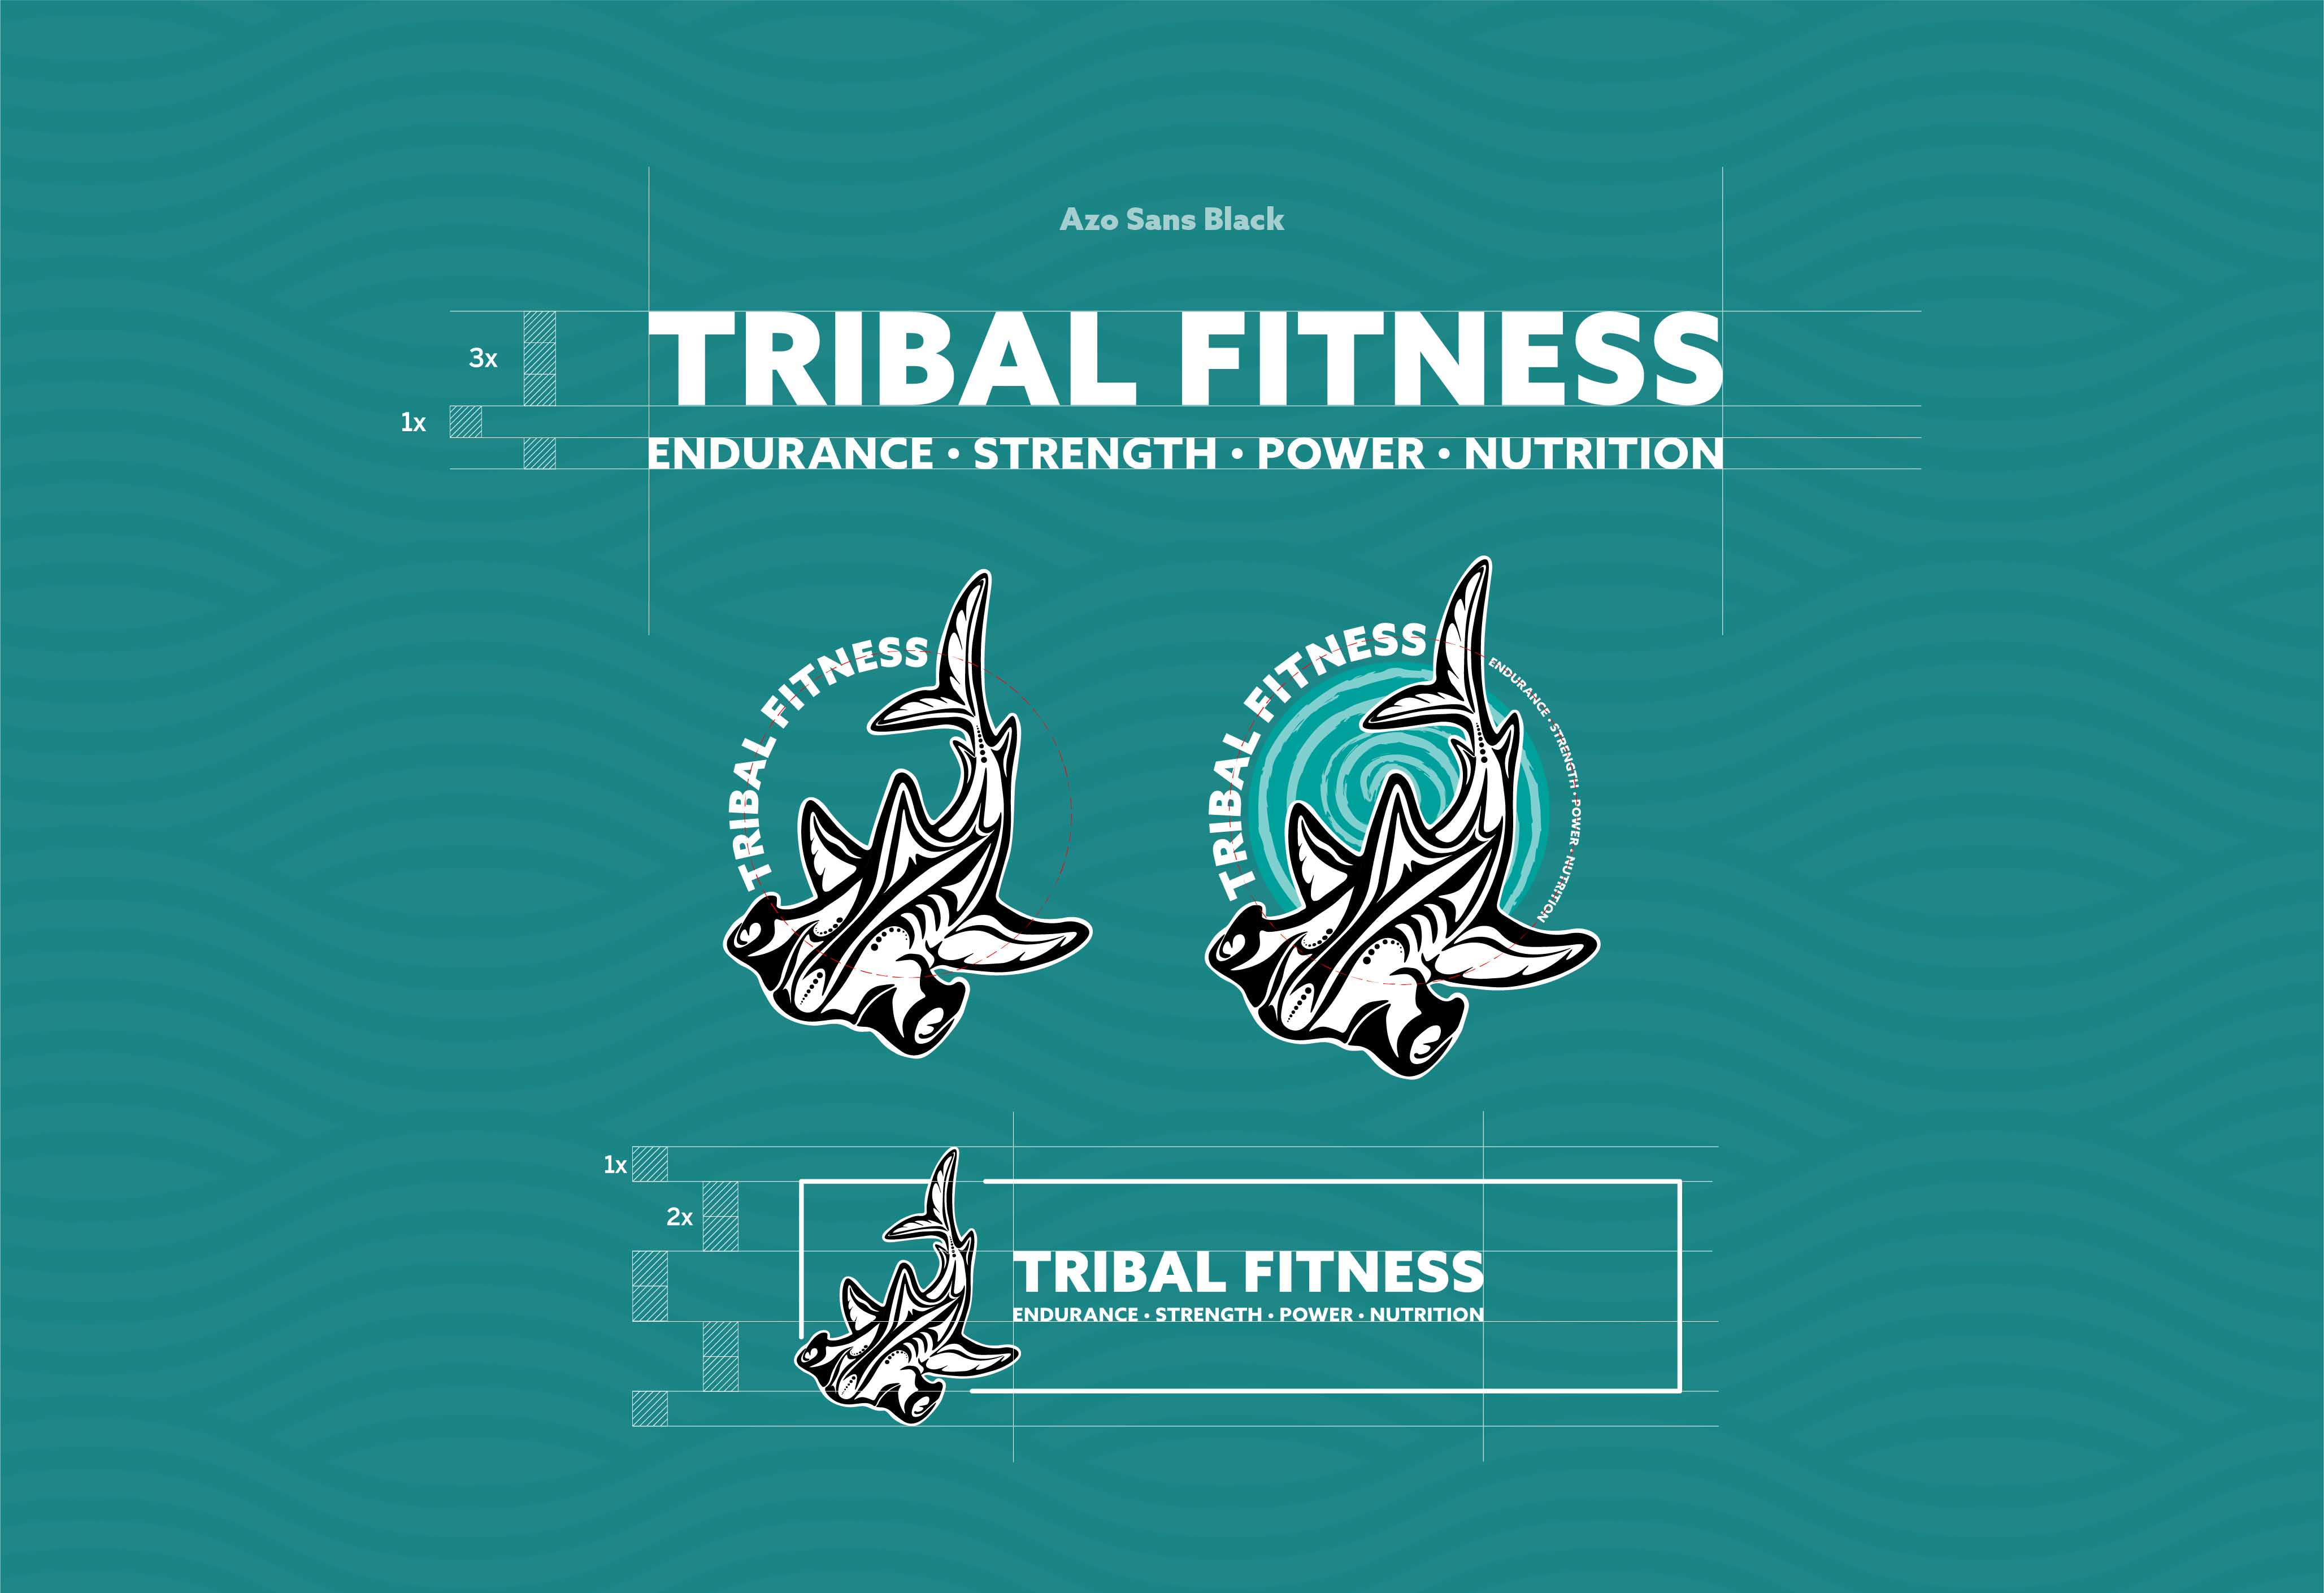 Tribal Fitness website with workout accessories